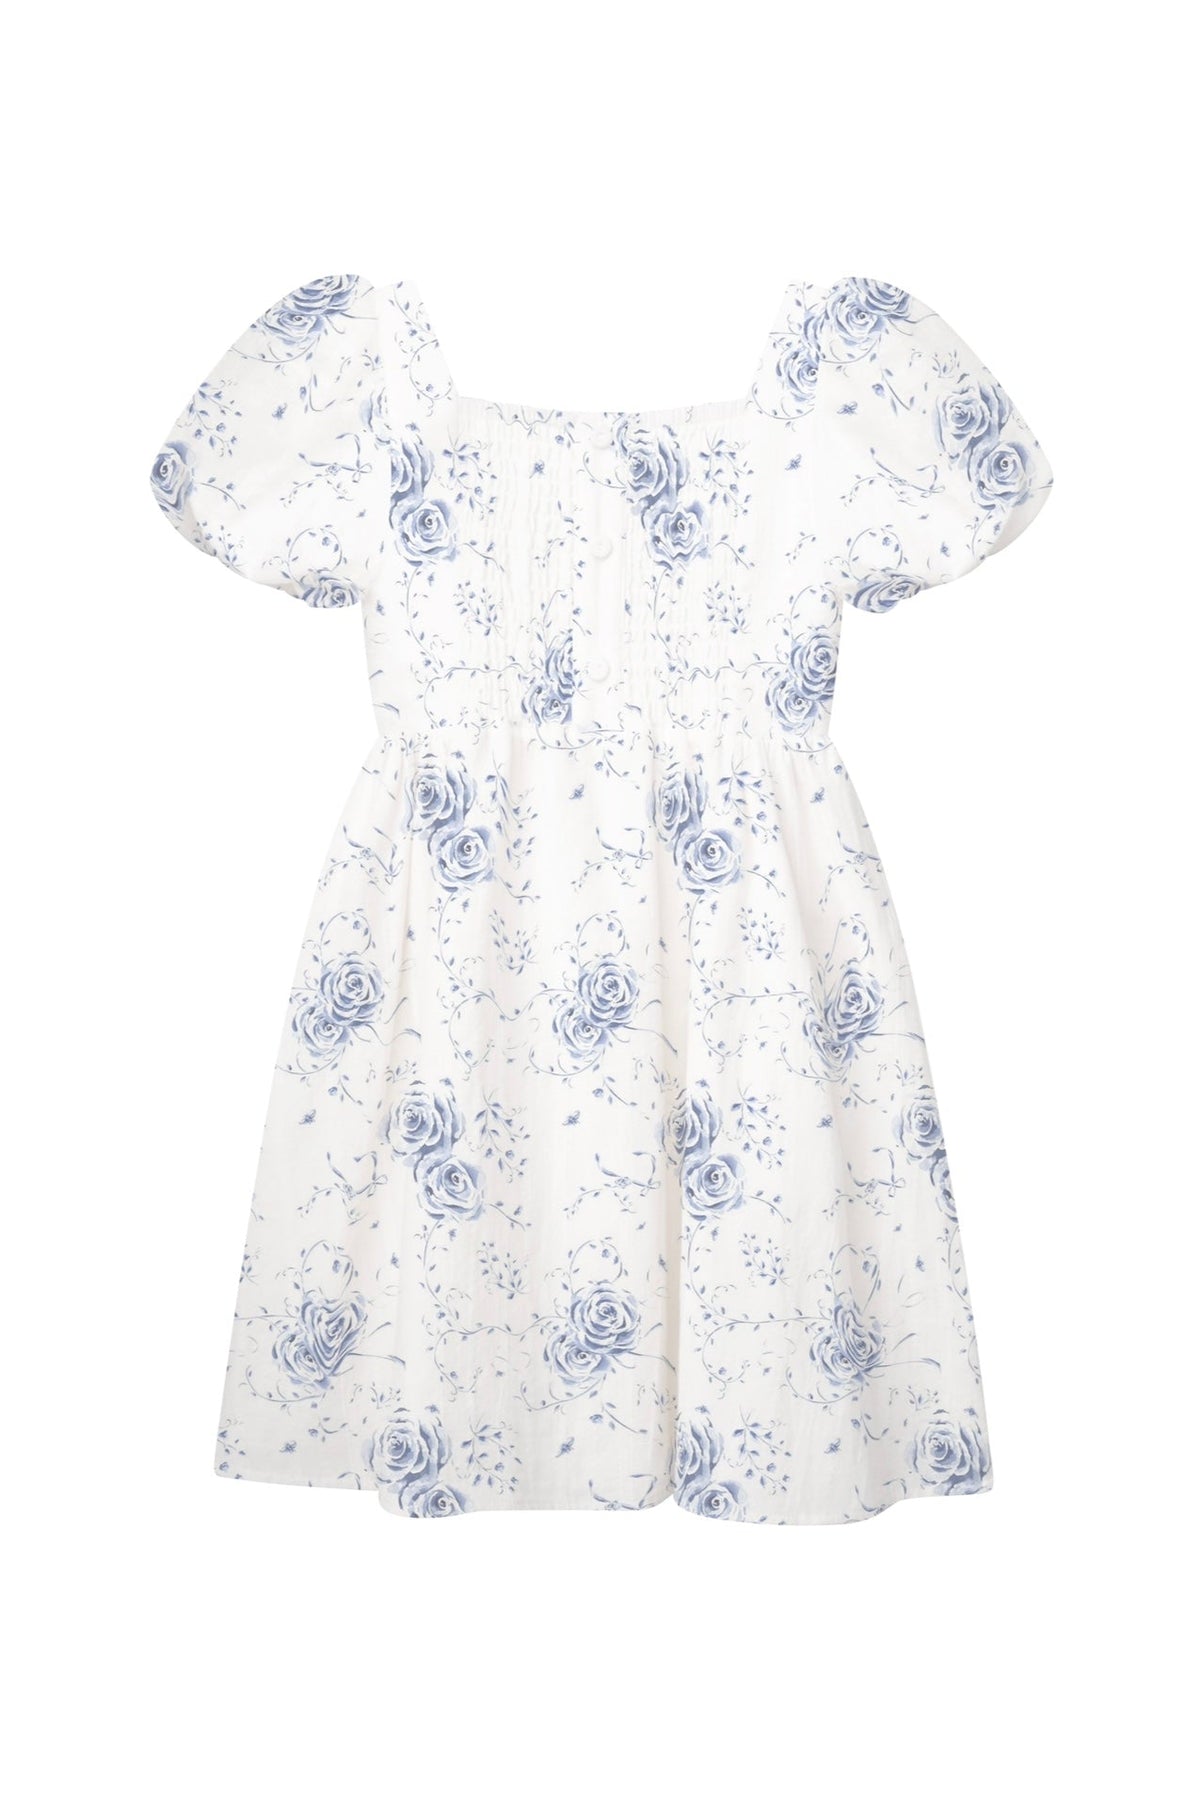 The Kylie Girl Dress in Blue Heirloom Floral